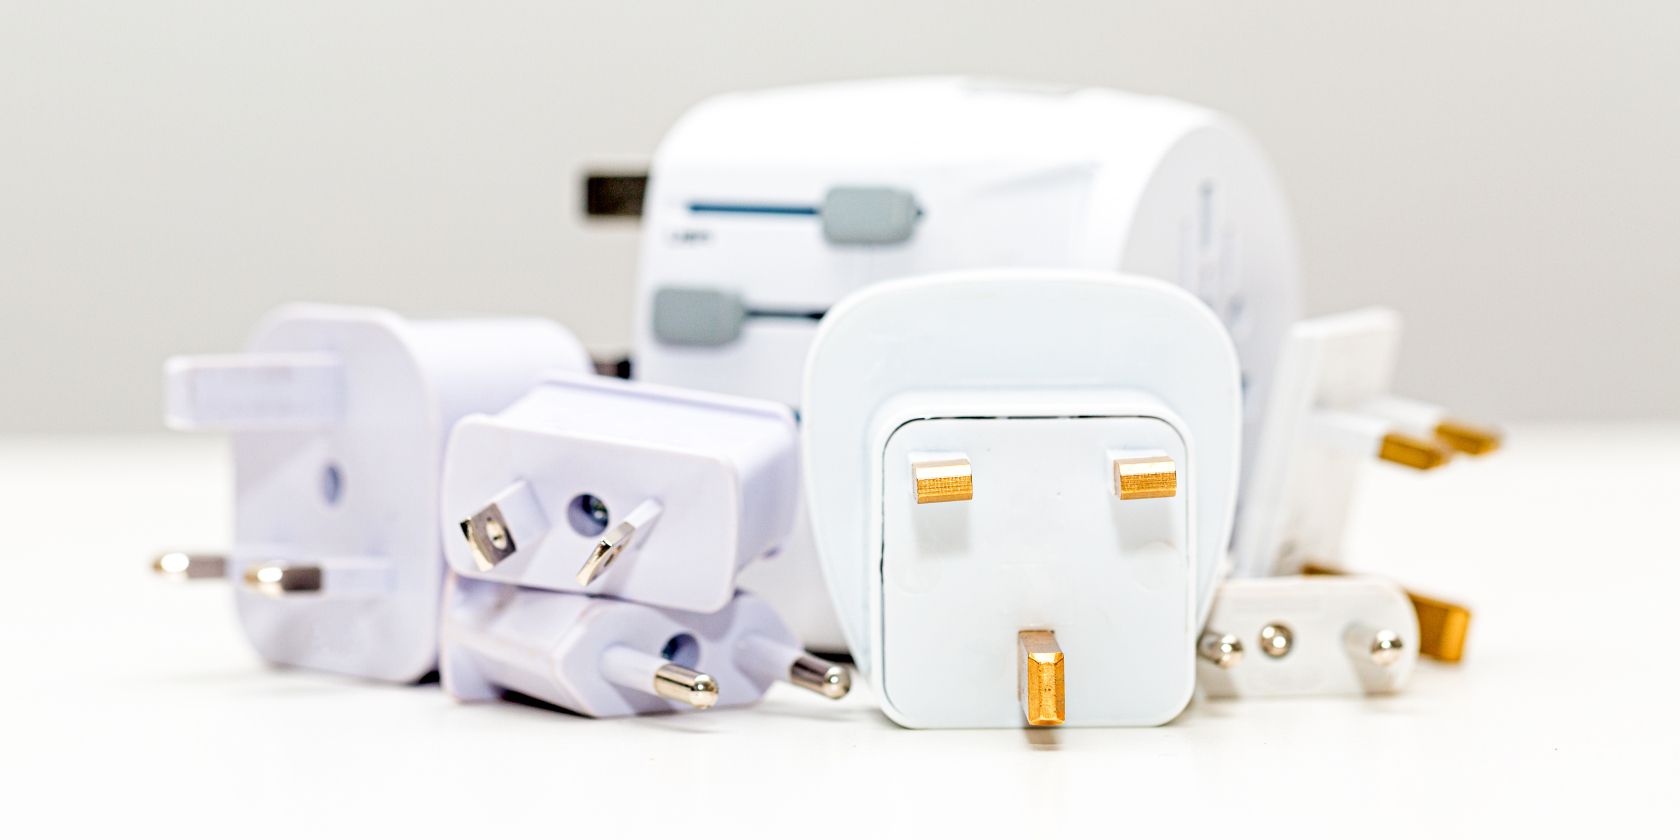 Various countries' plugs piled on top of each other